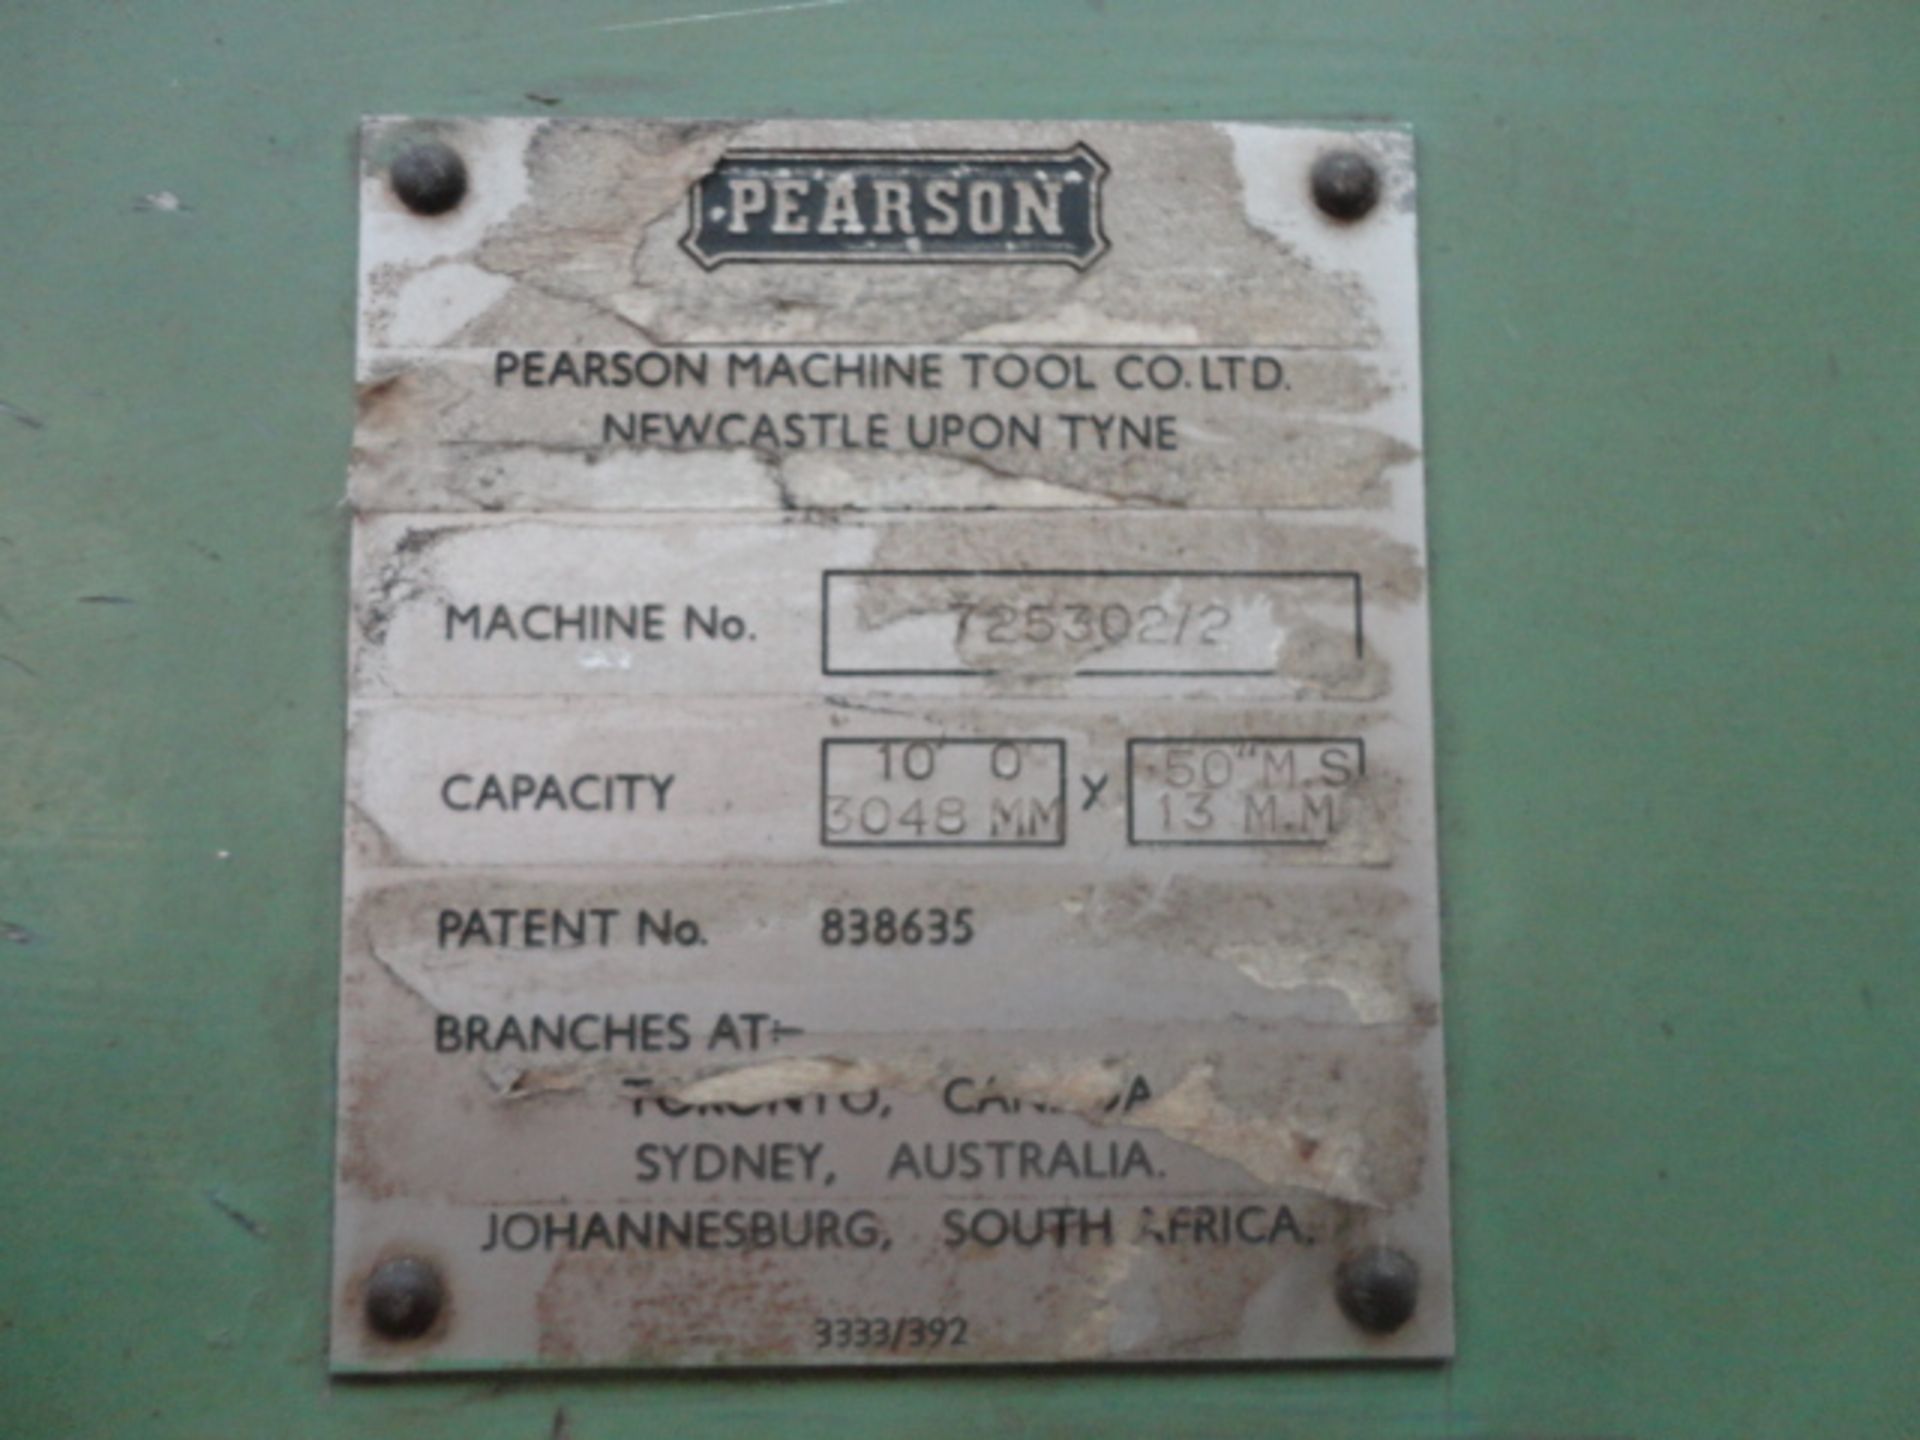 Pearson 3048mm x 13mm Guillotine Shear, machine no. 725302/2, patent no. 838635, with safety fencing - Image 4 of 6